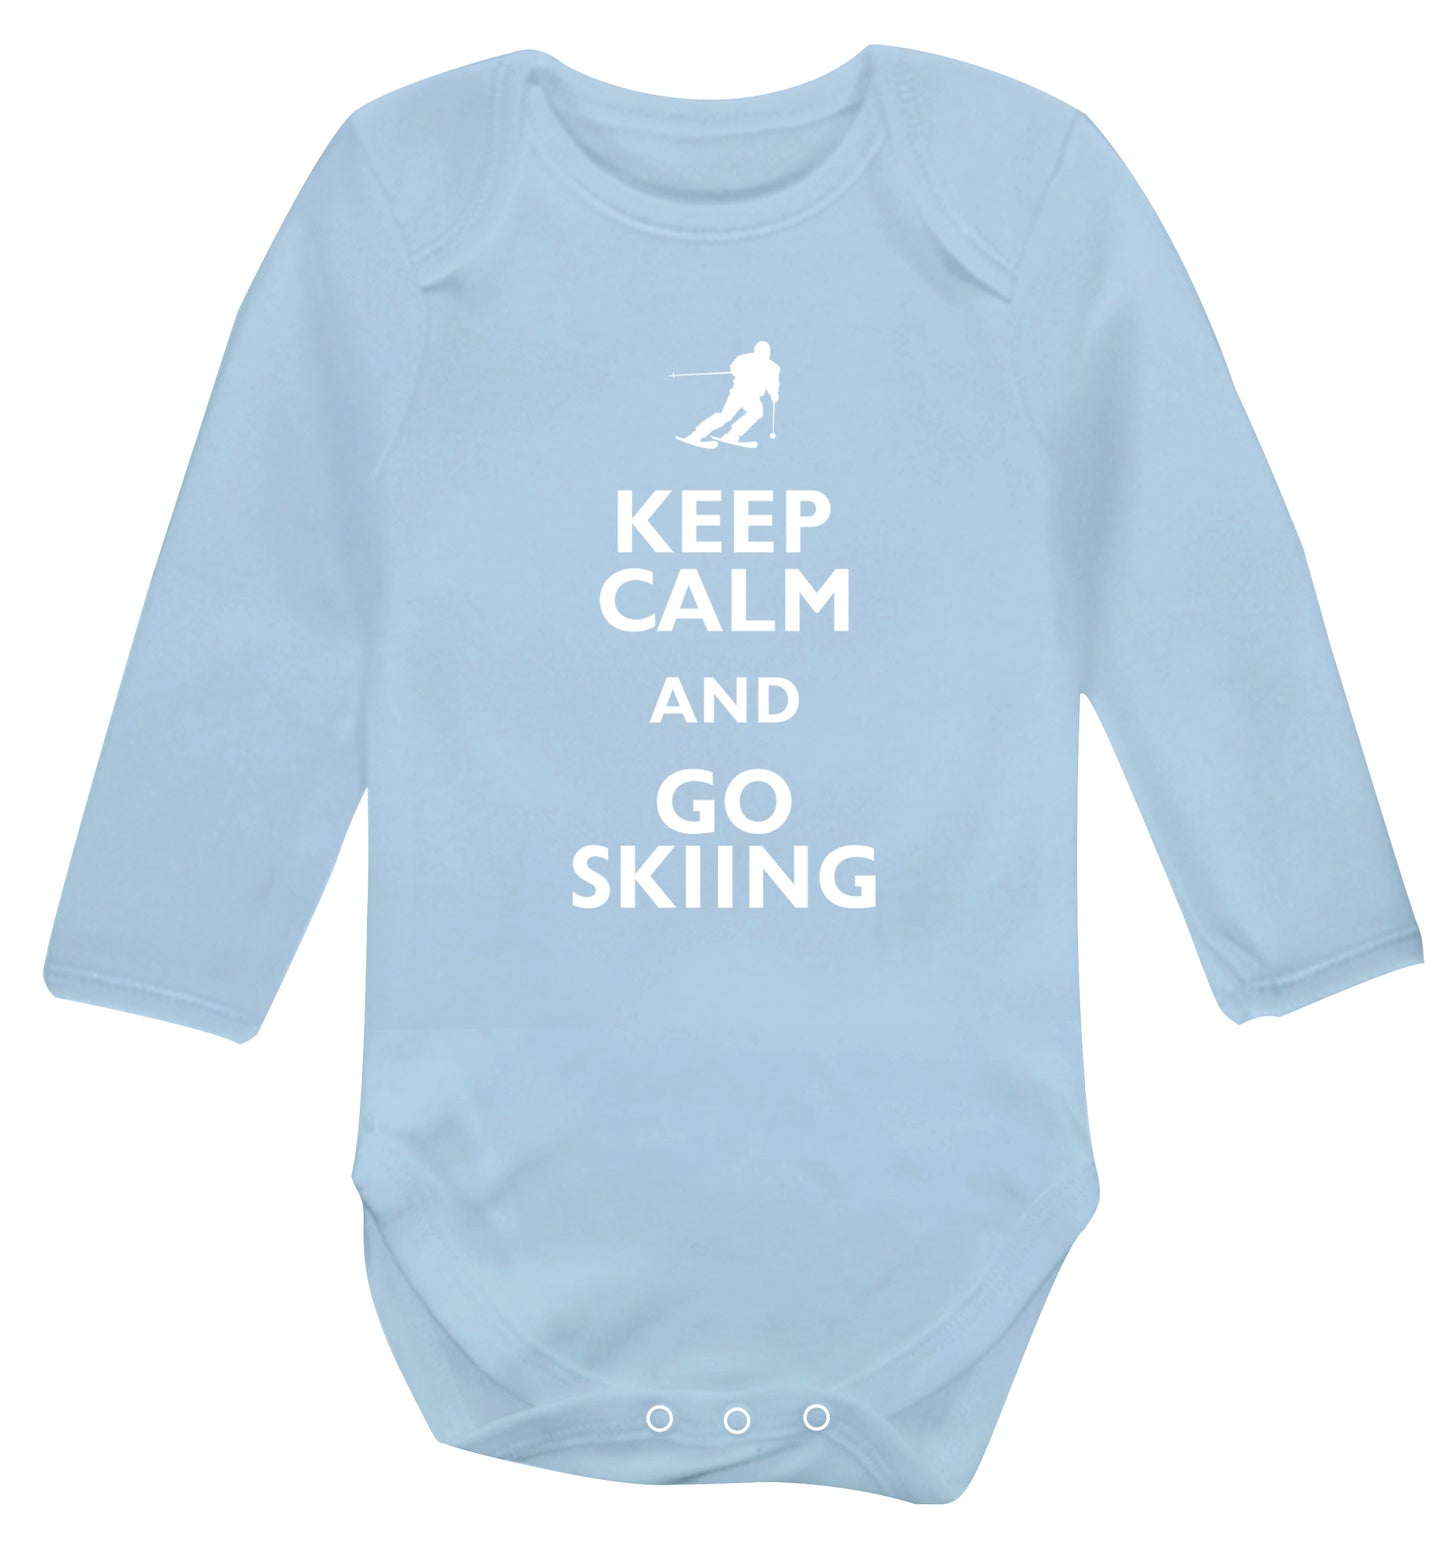 Keep calm and go skiing Baby Vest long sleeved pale blue 6-12 months